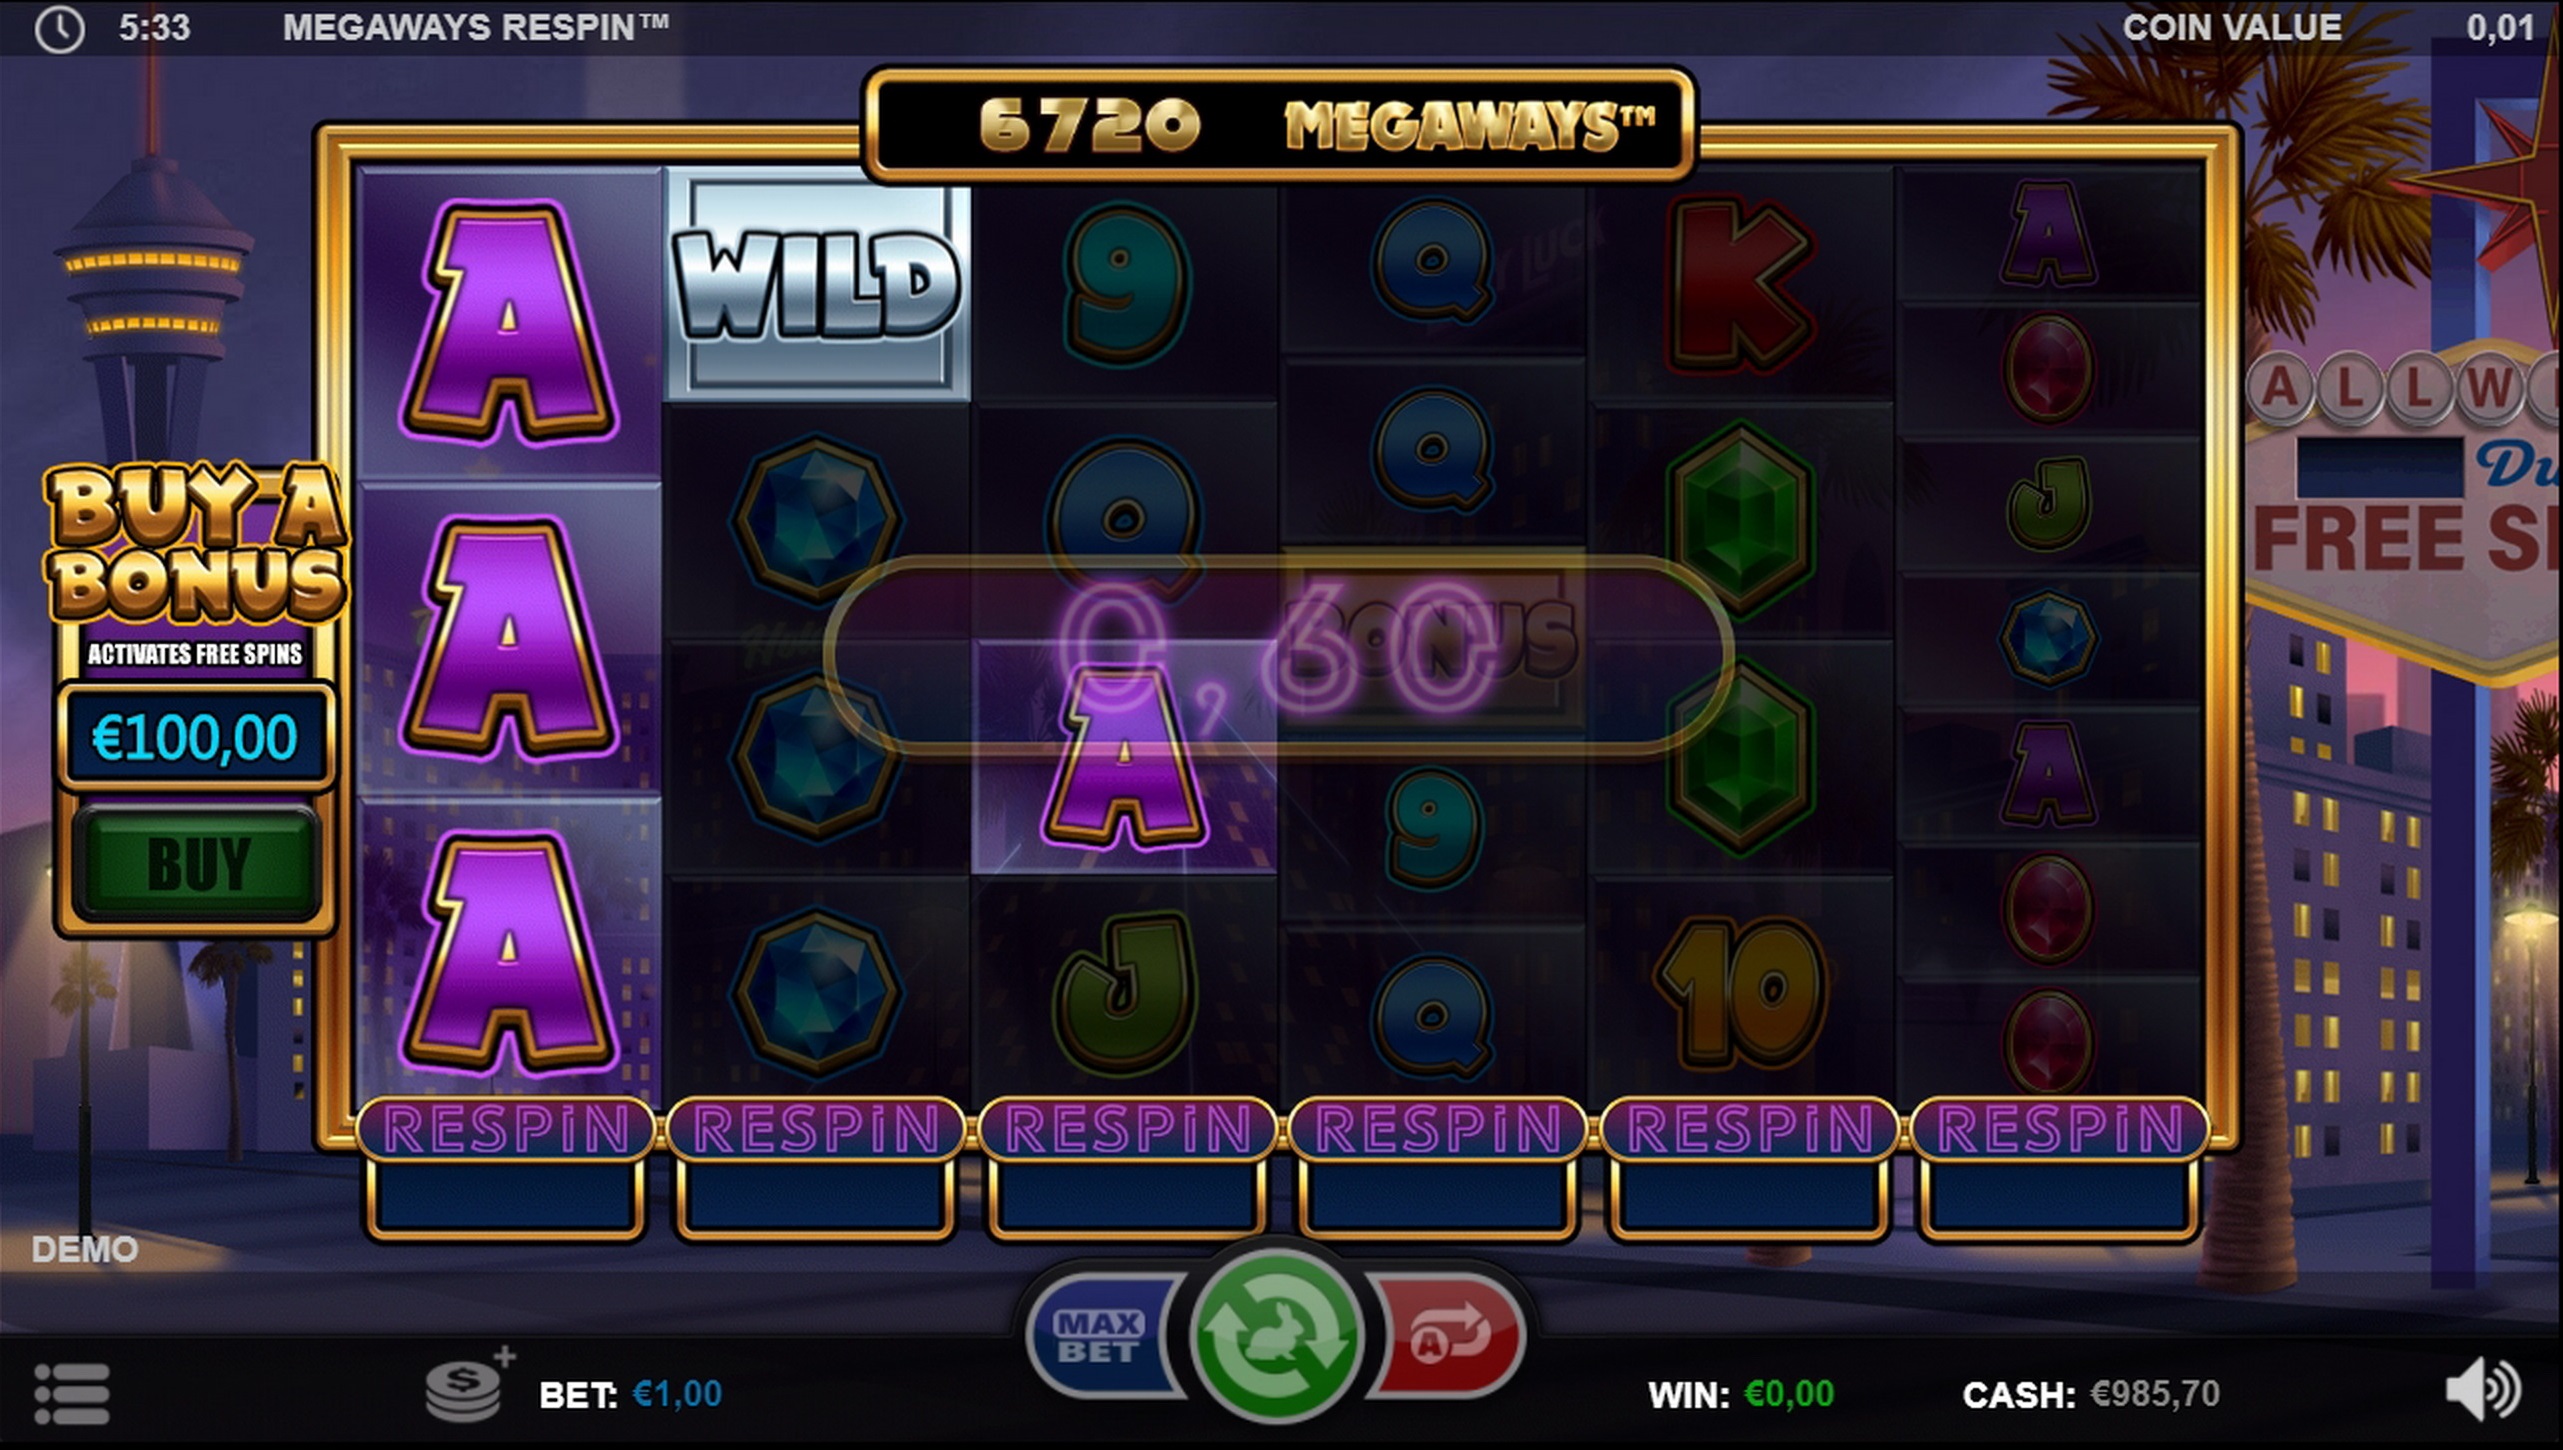 Win Money in Megaways Respin Free Slot Game by Games Inc